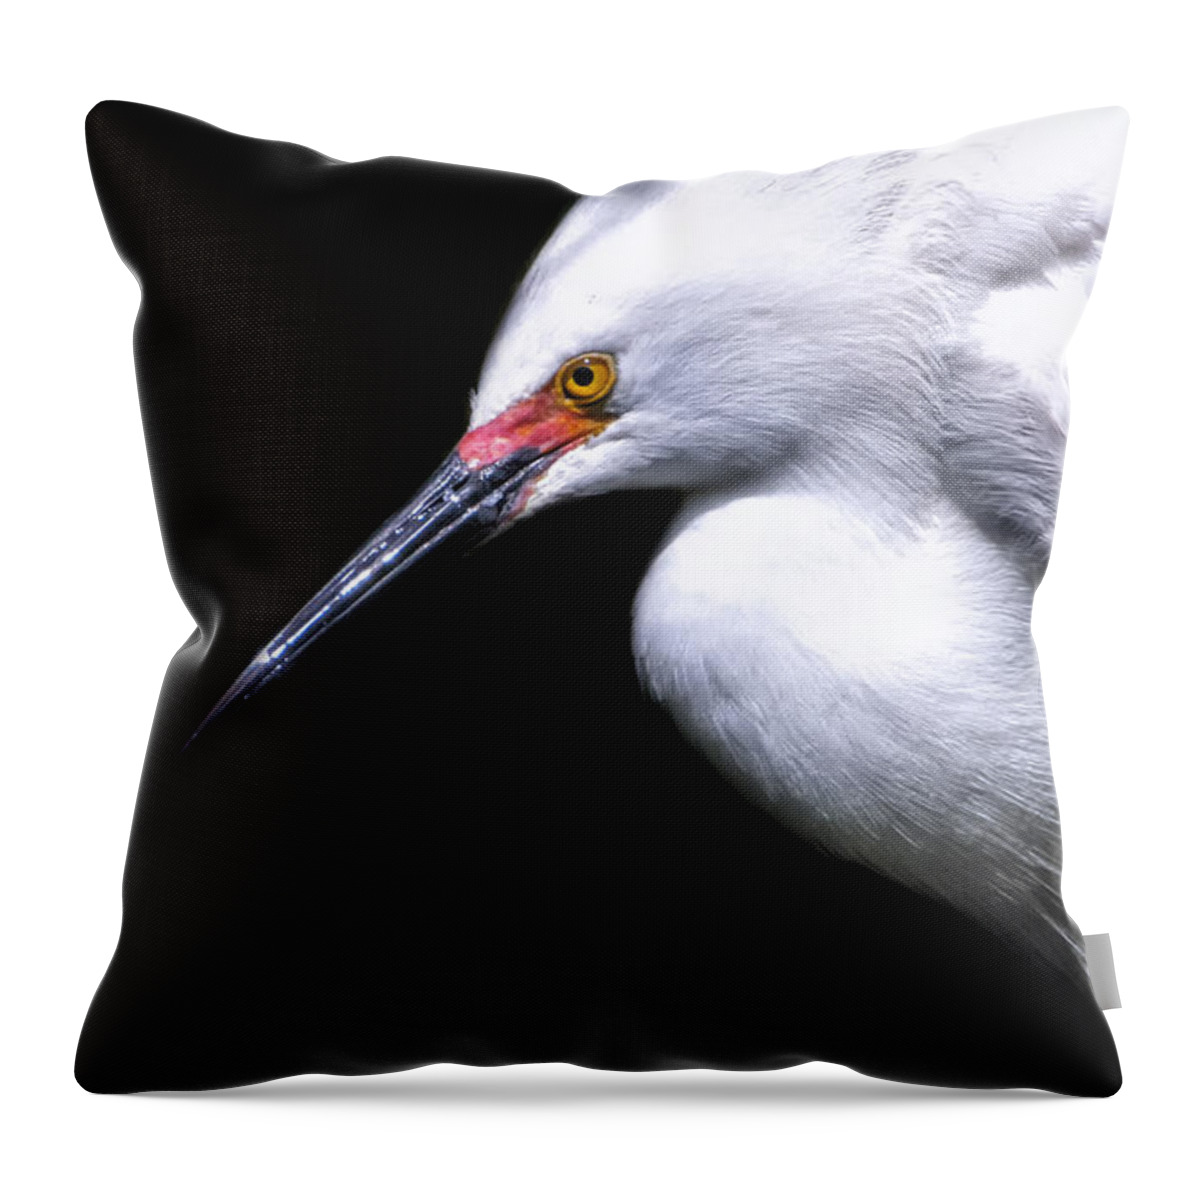 Crystal Yingling Throw Pillow featuring the photograph A Little Light by Ghostwinds Photography